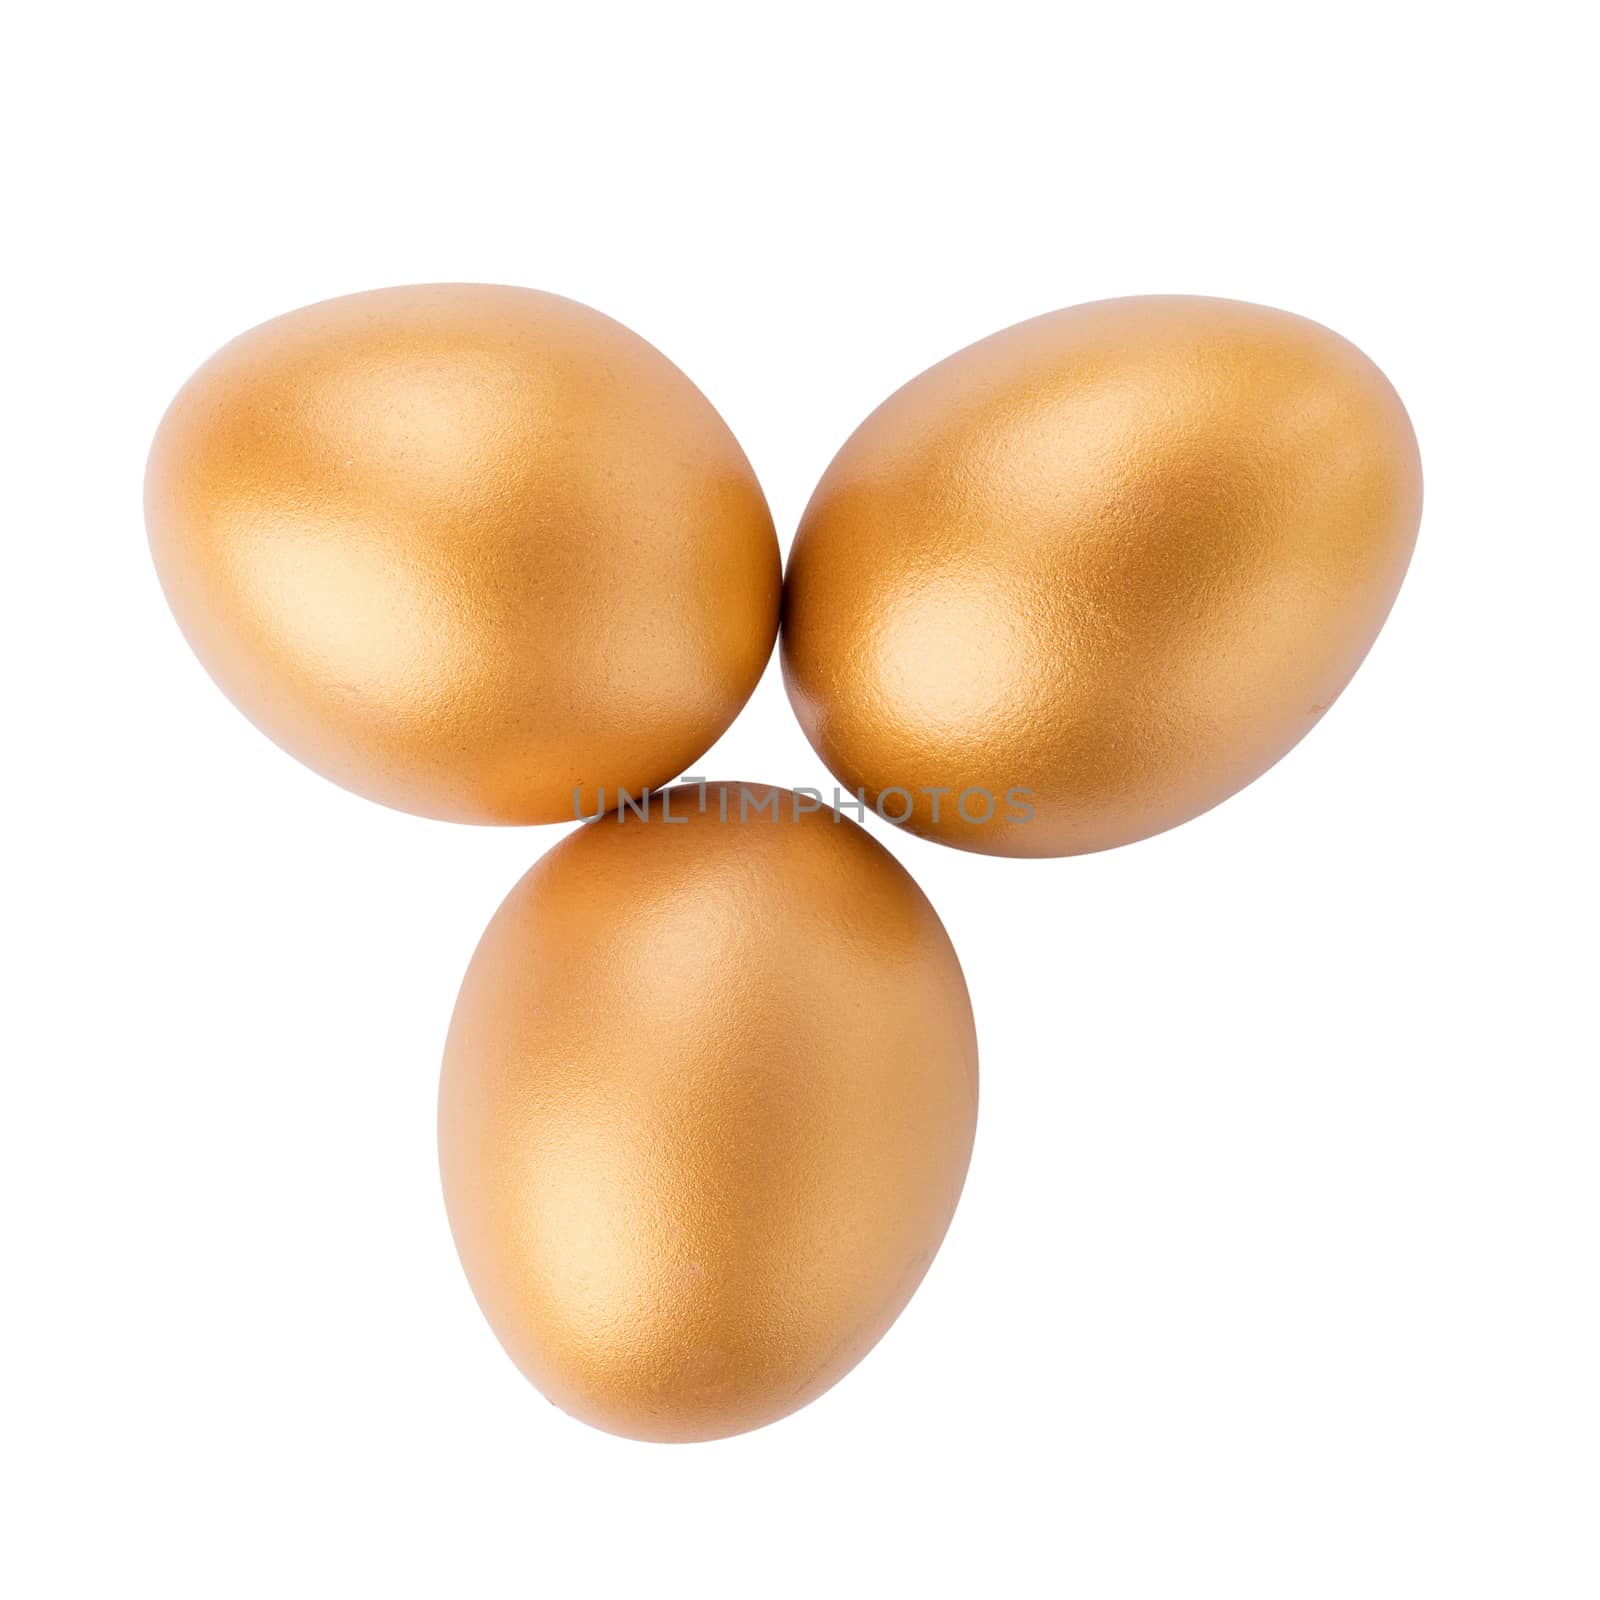 Golden Egg isolated on a white background.